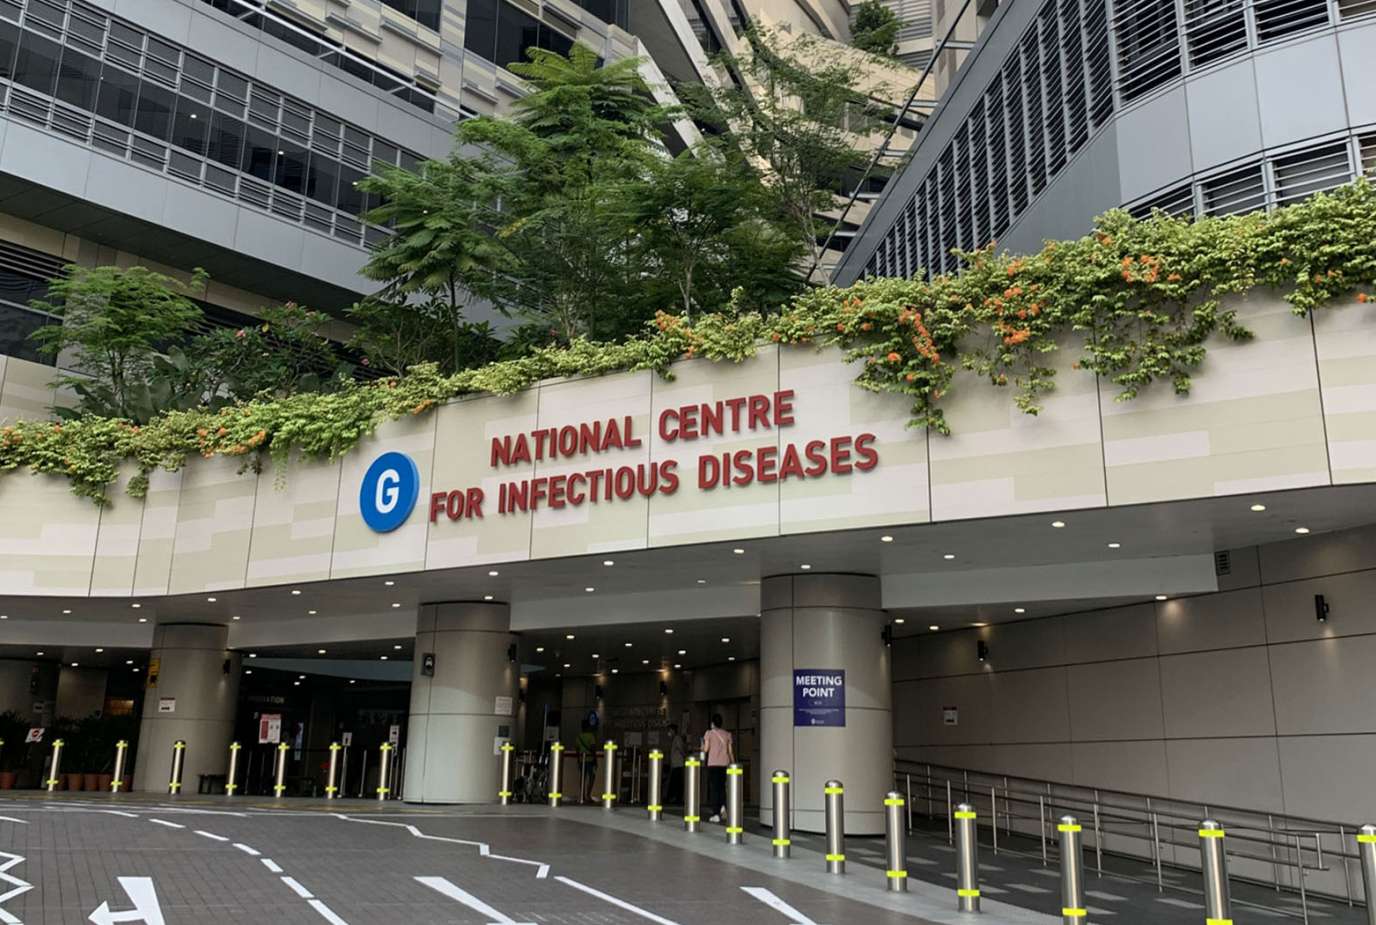 National Centre for Infectious Diseases